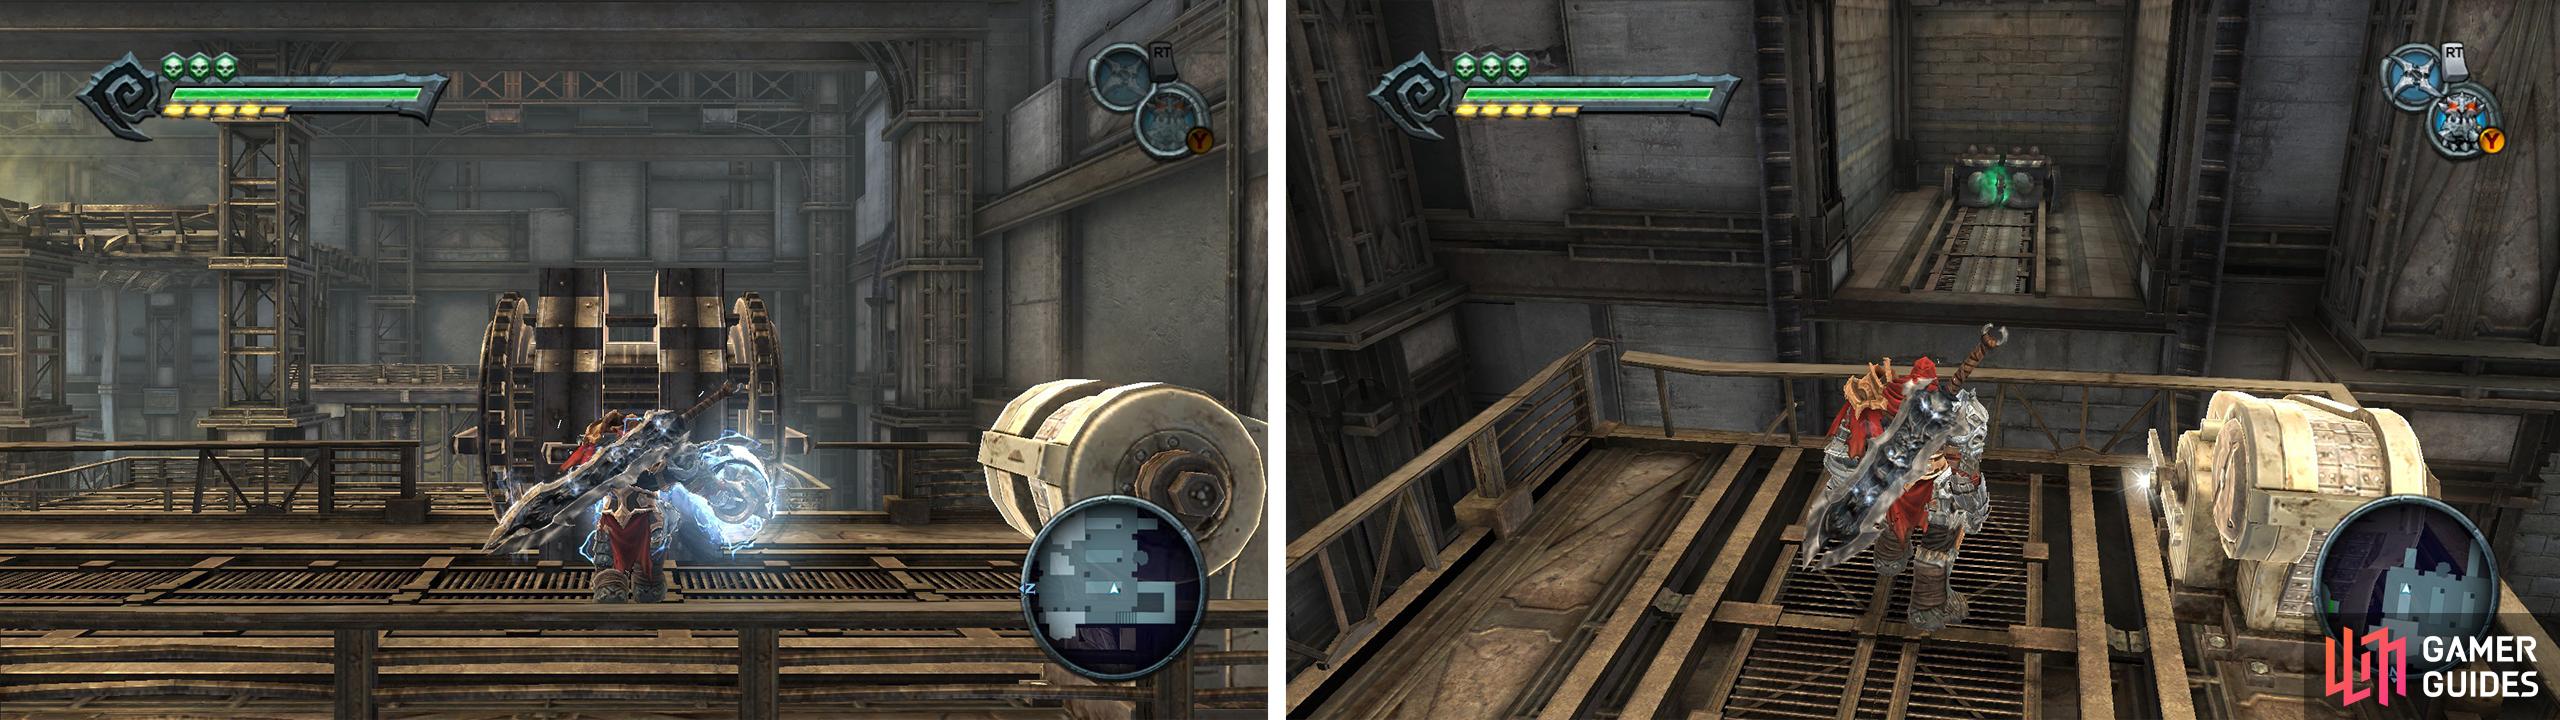 Punch the machinery between the raised platforms (left) until you reach the highest one. Here you can jump across to an Artefact (right).